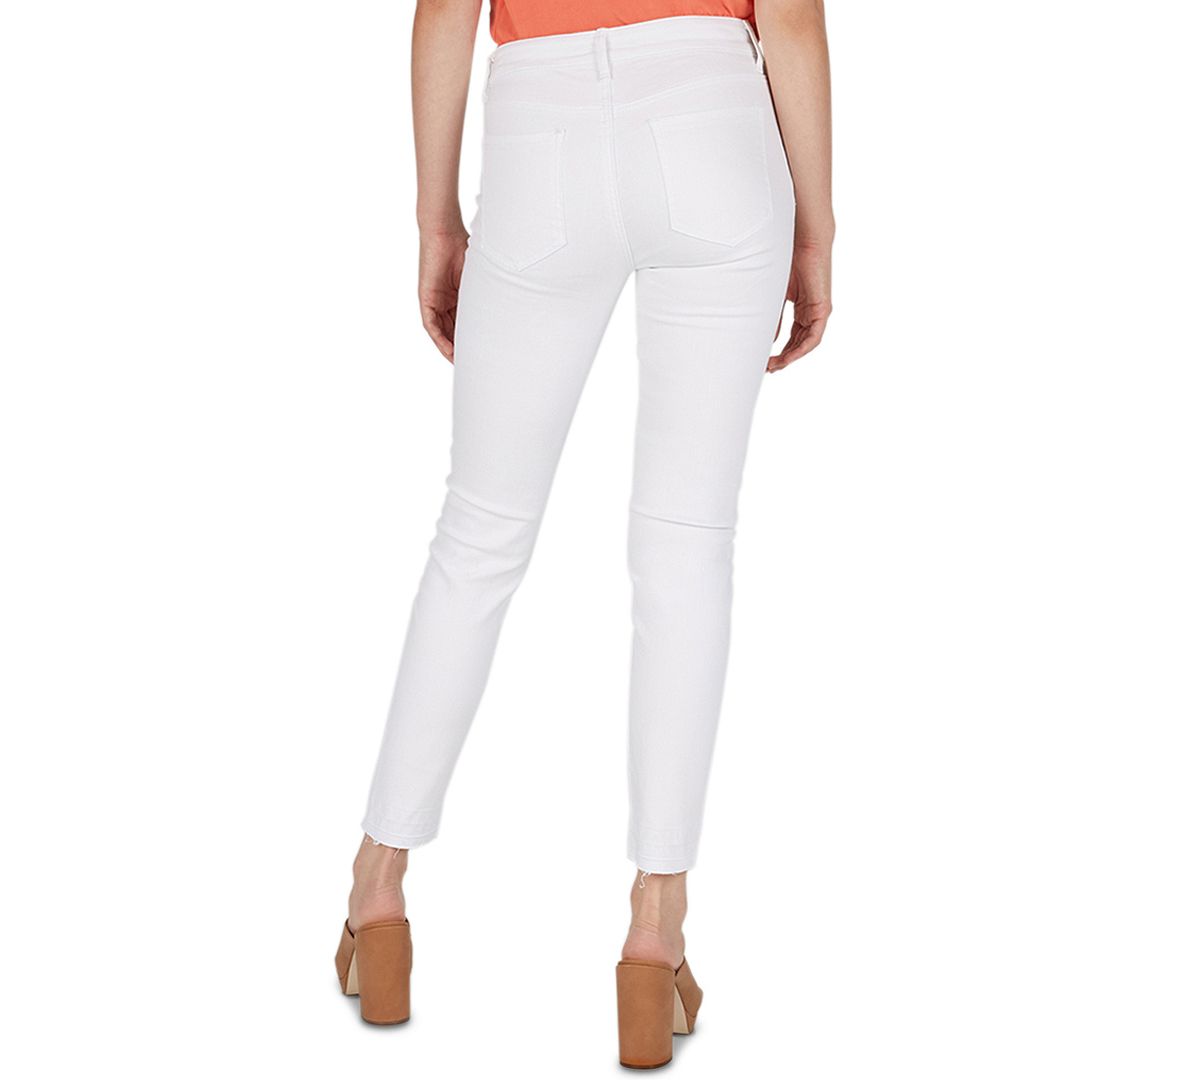 Numero Mid-rise Distressed Skinny Jeans White